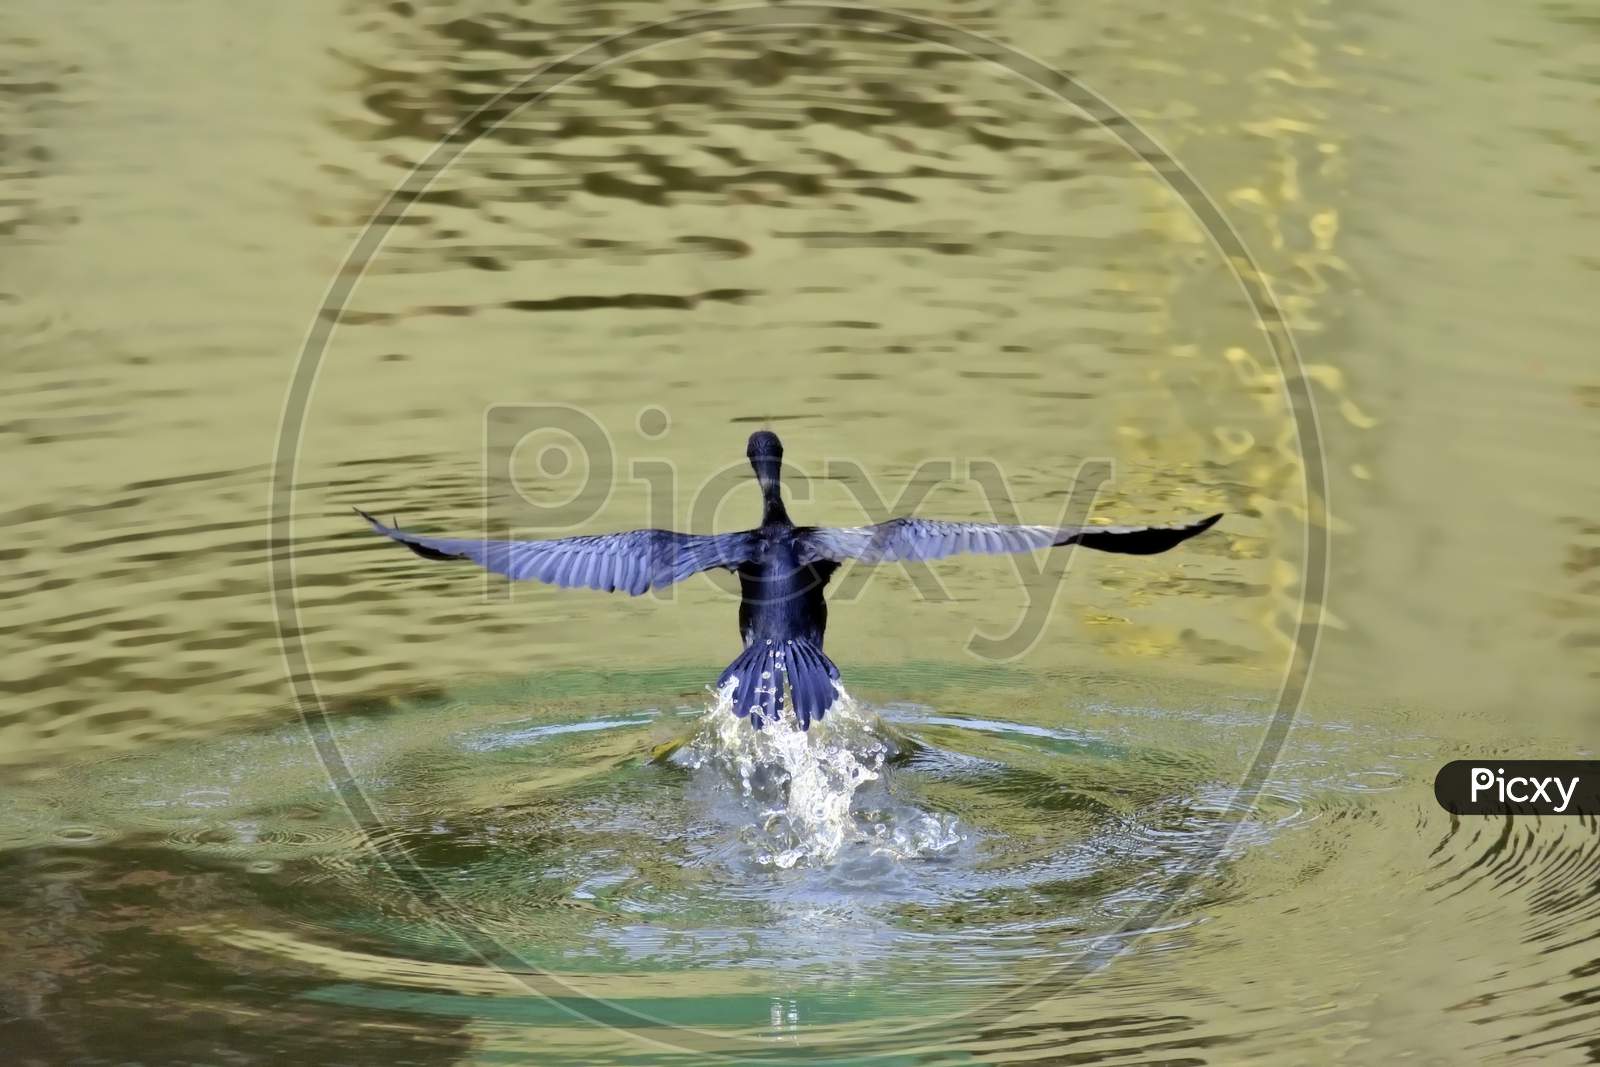 The Cormorant taking off after fishing